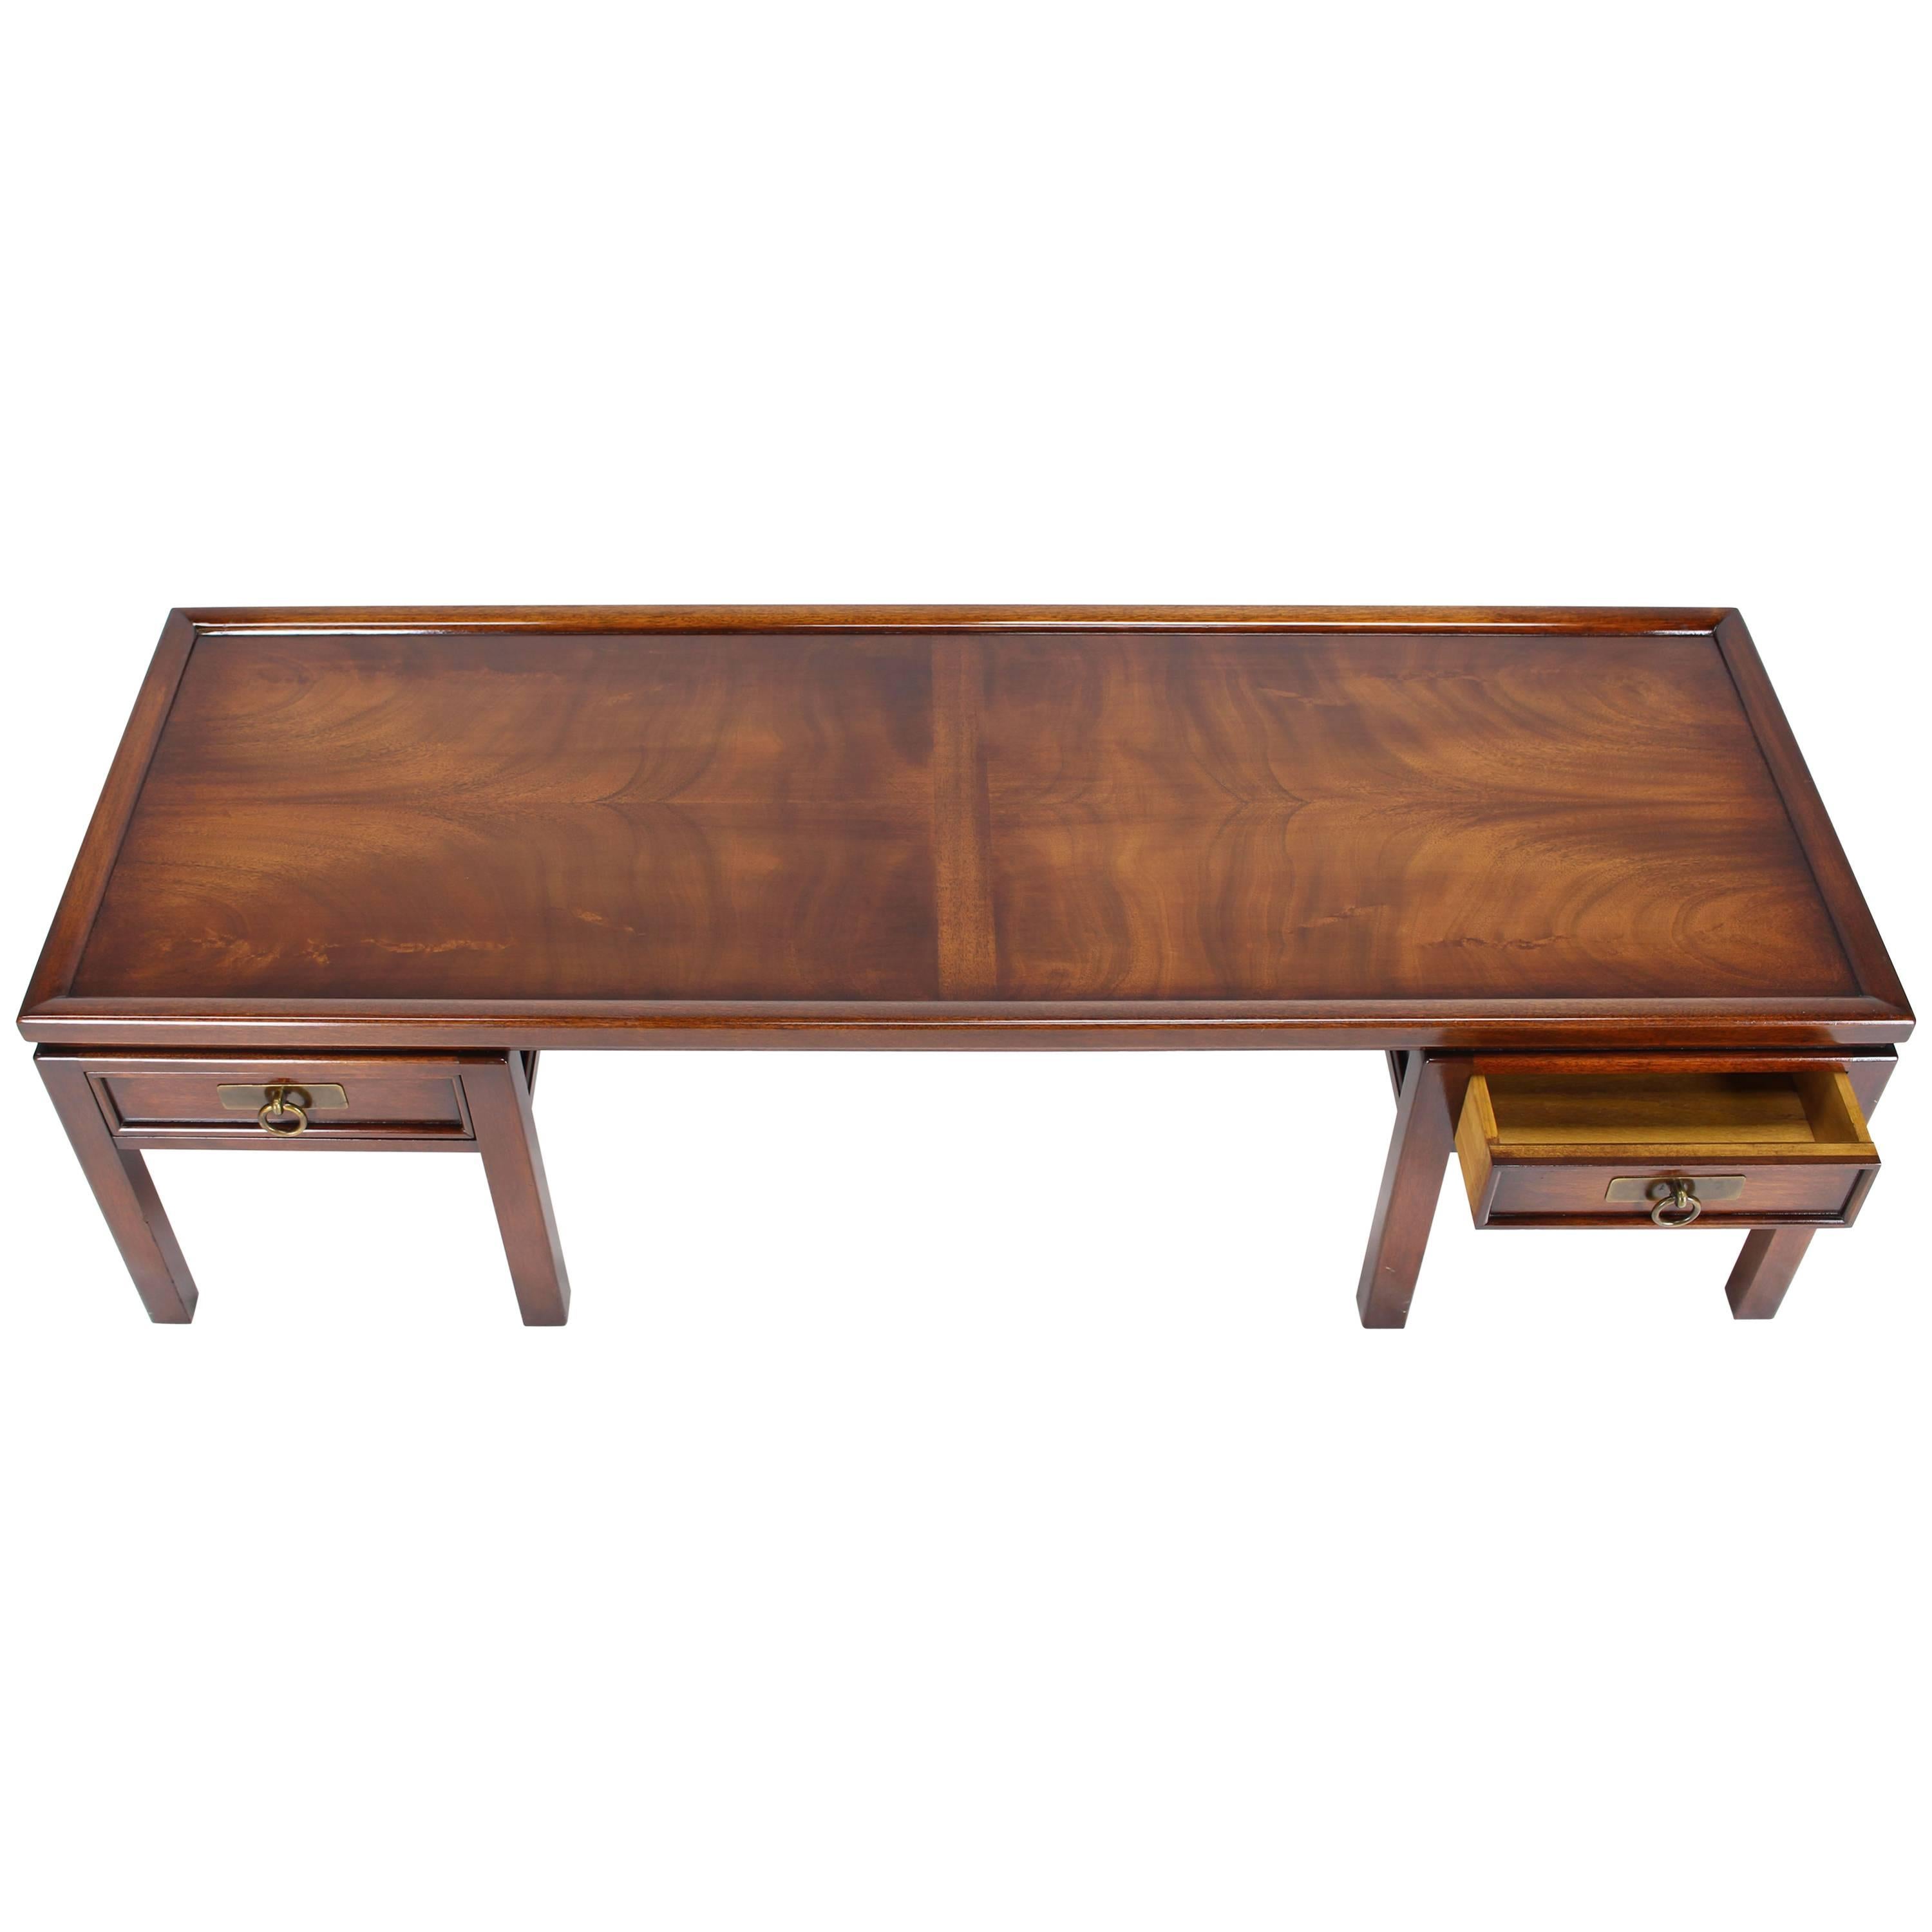 Mahogany Double Pedestal Two Drawers Rectangular Coffee Table